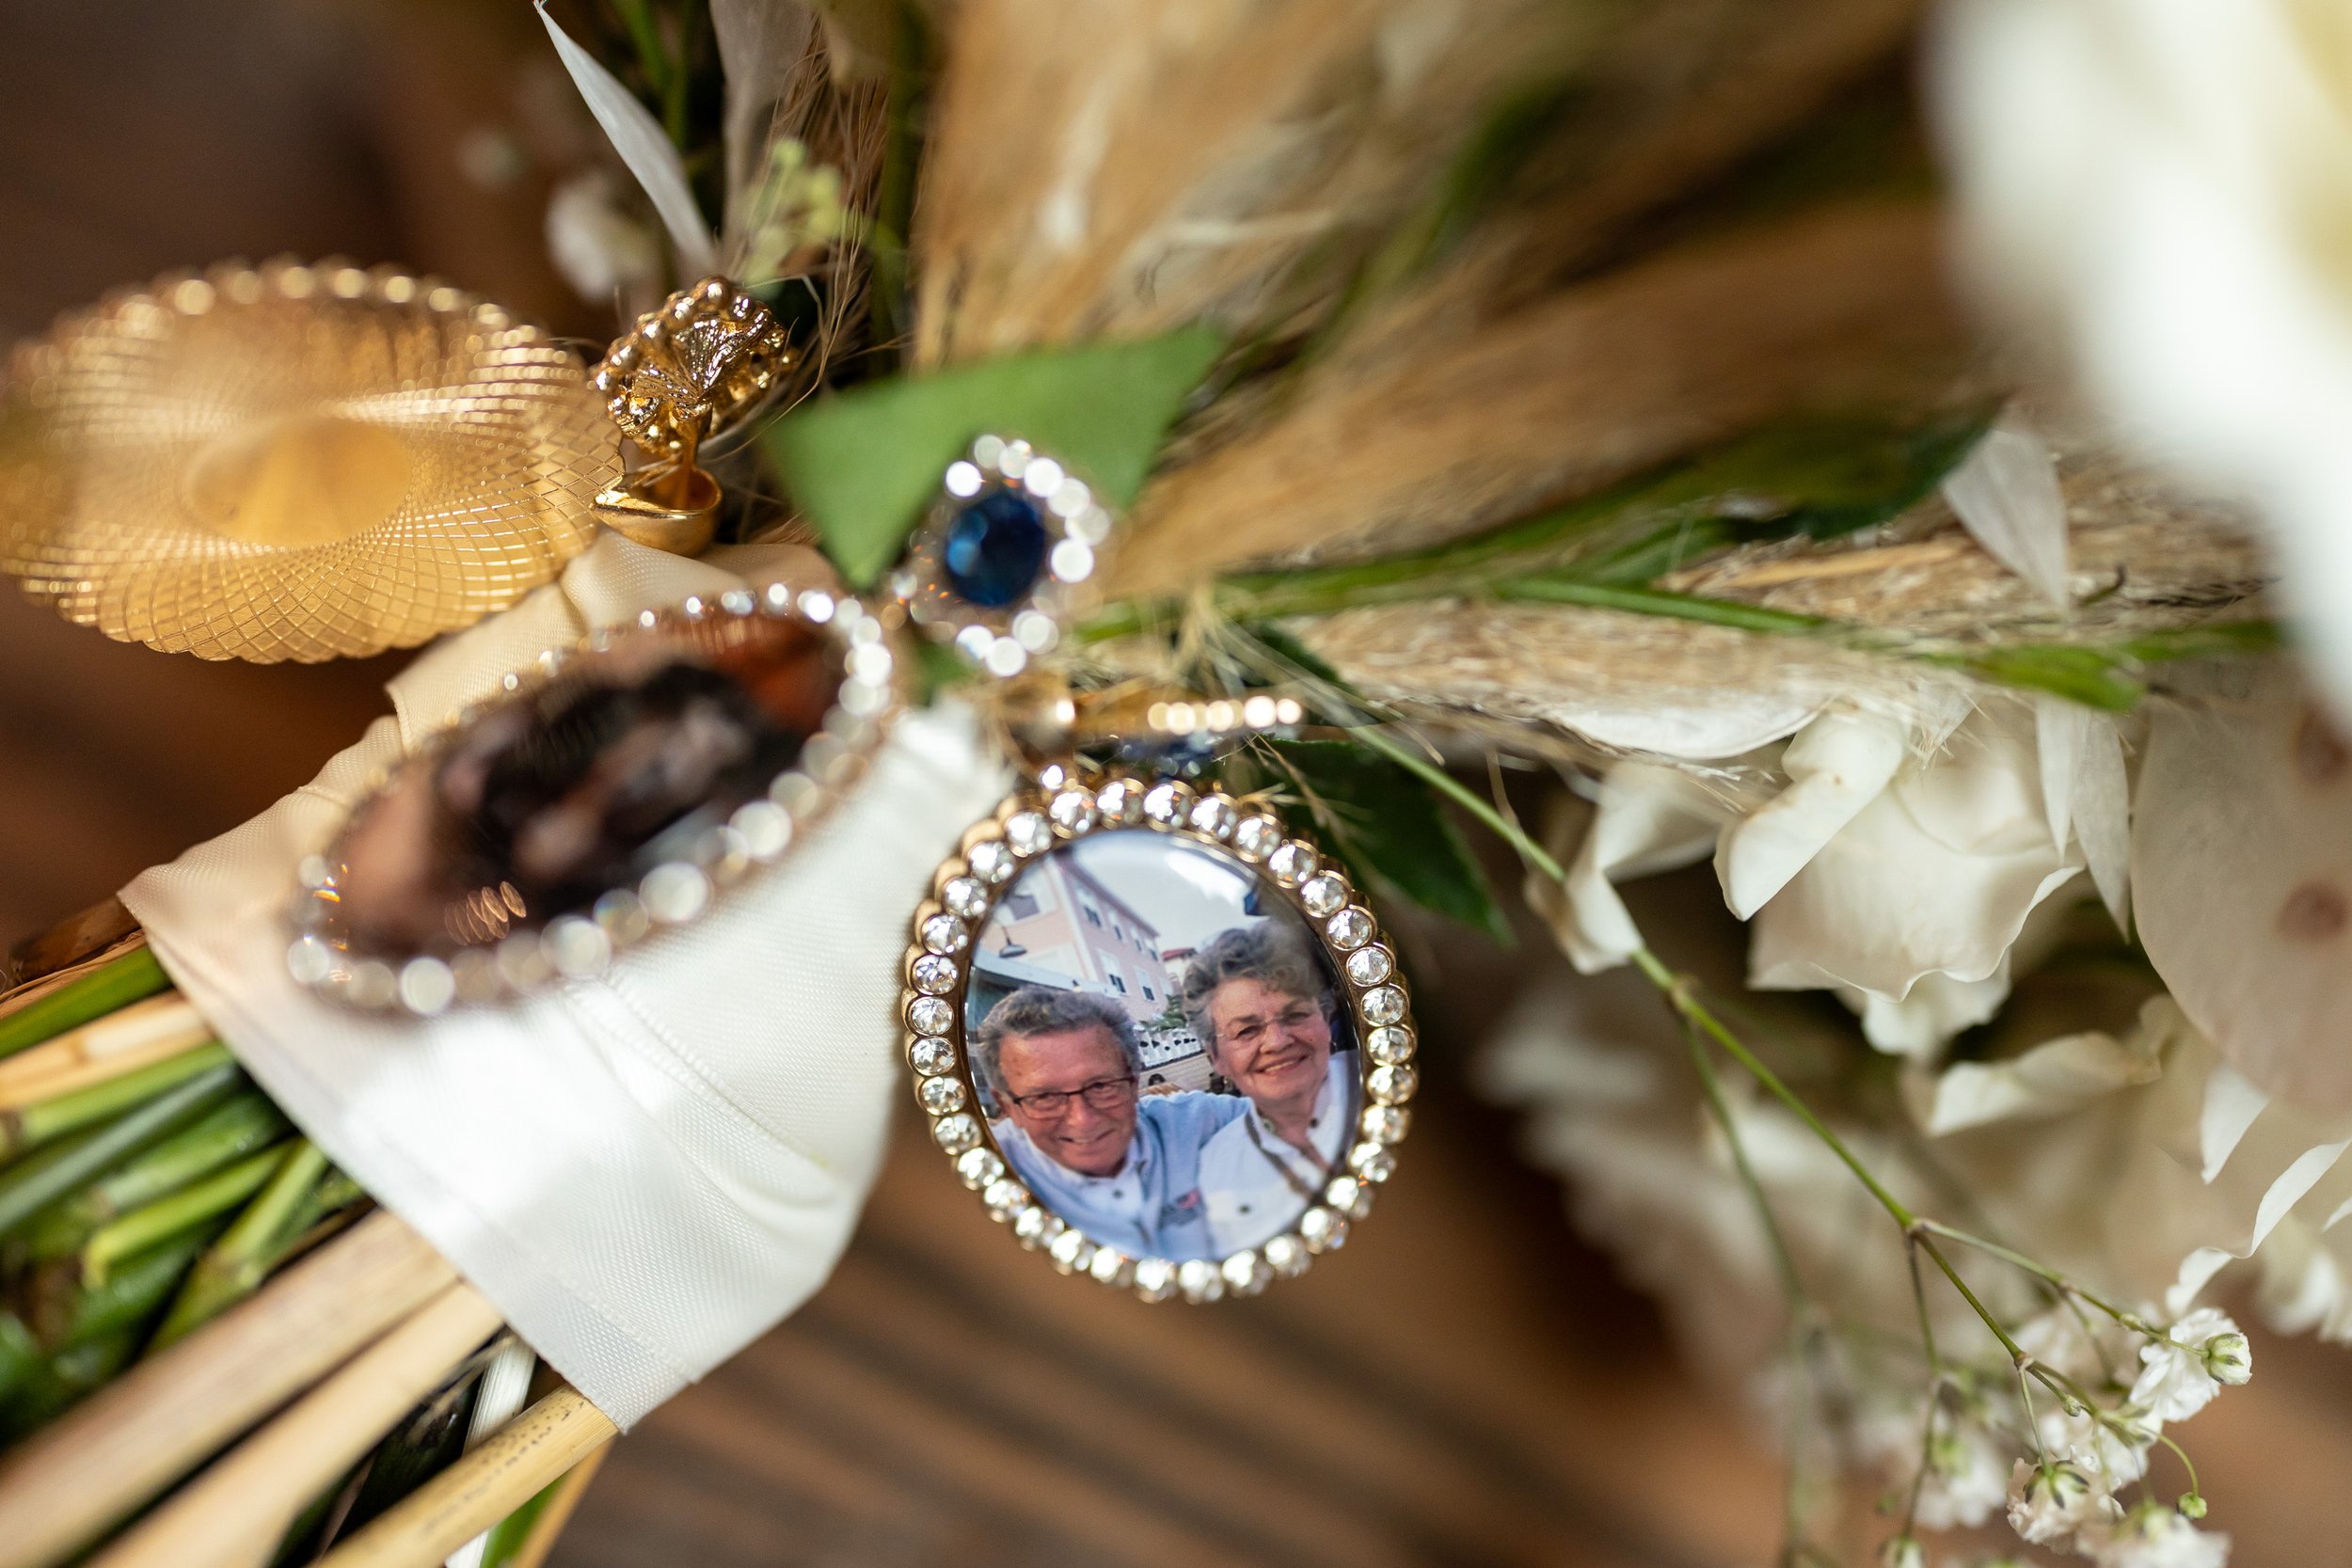 Wedding photo details at Kitty Hawk Pier at Outer Banks NC